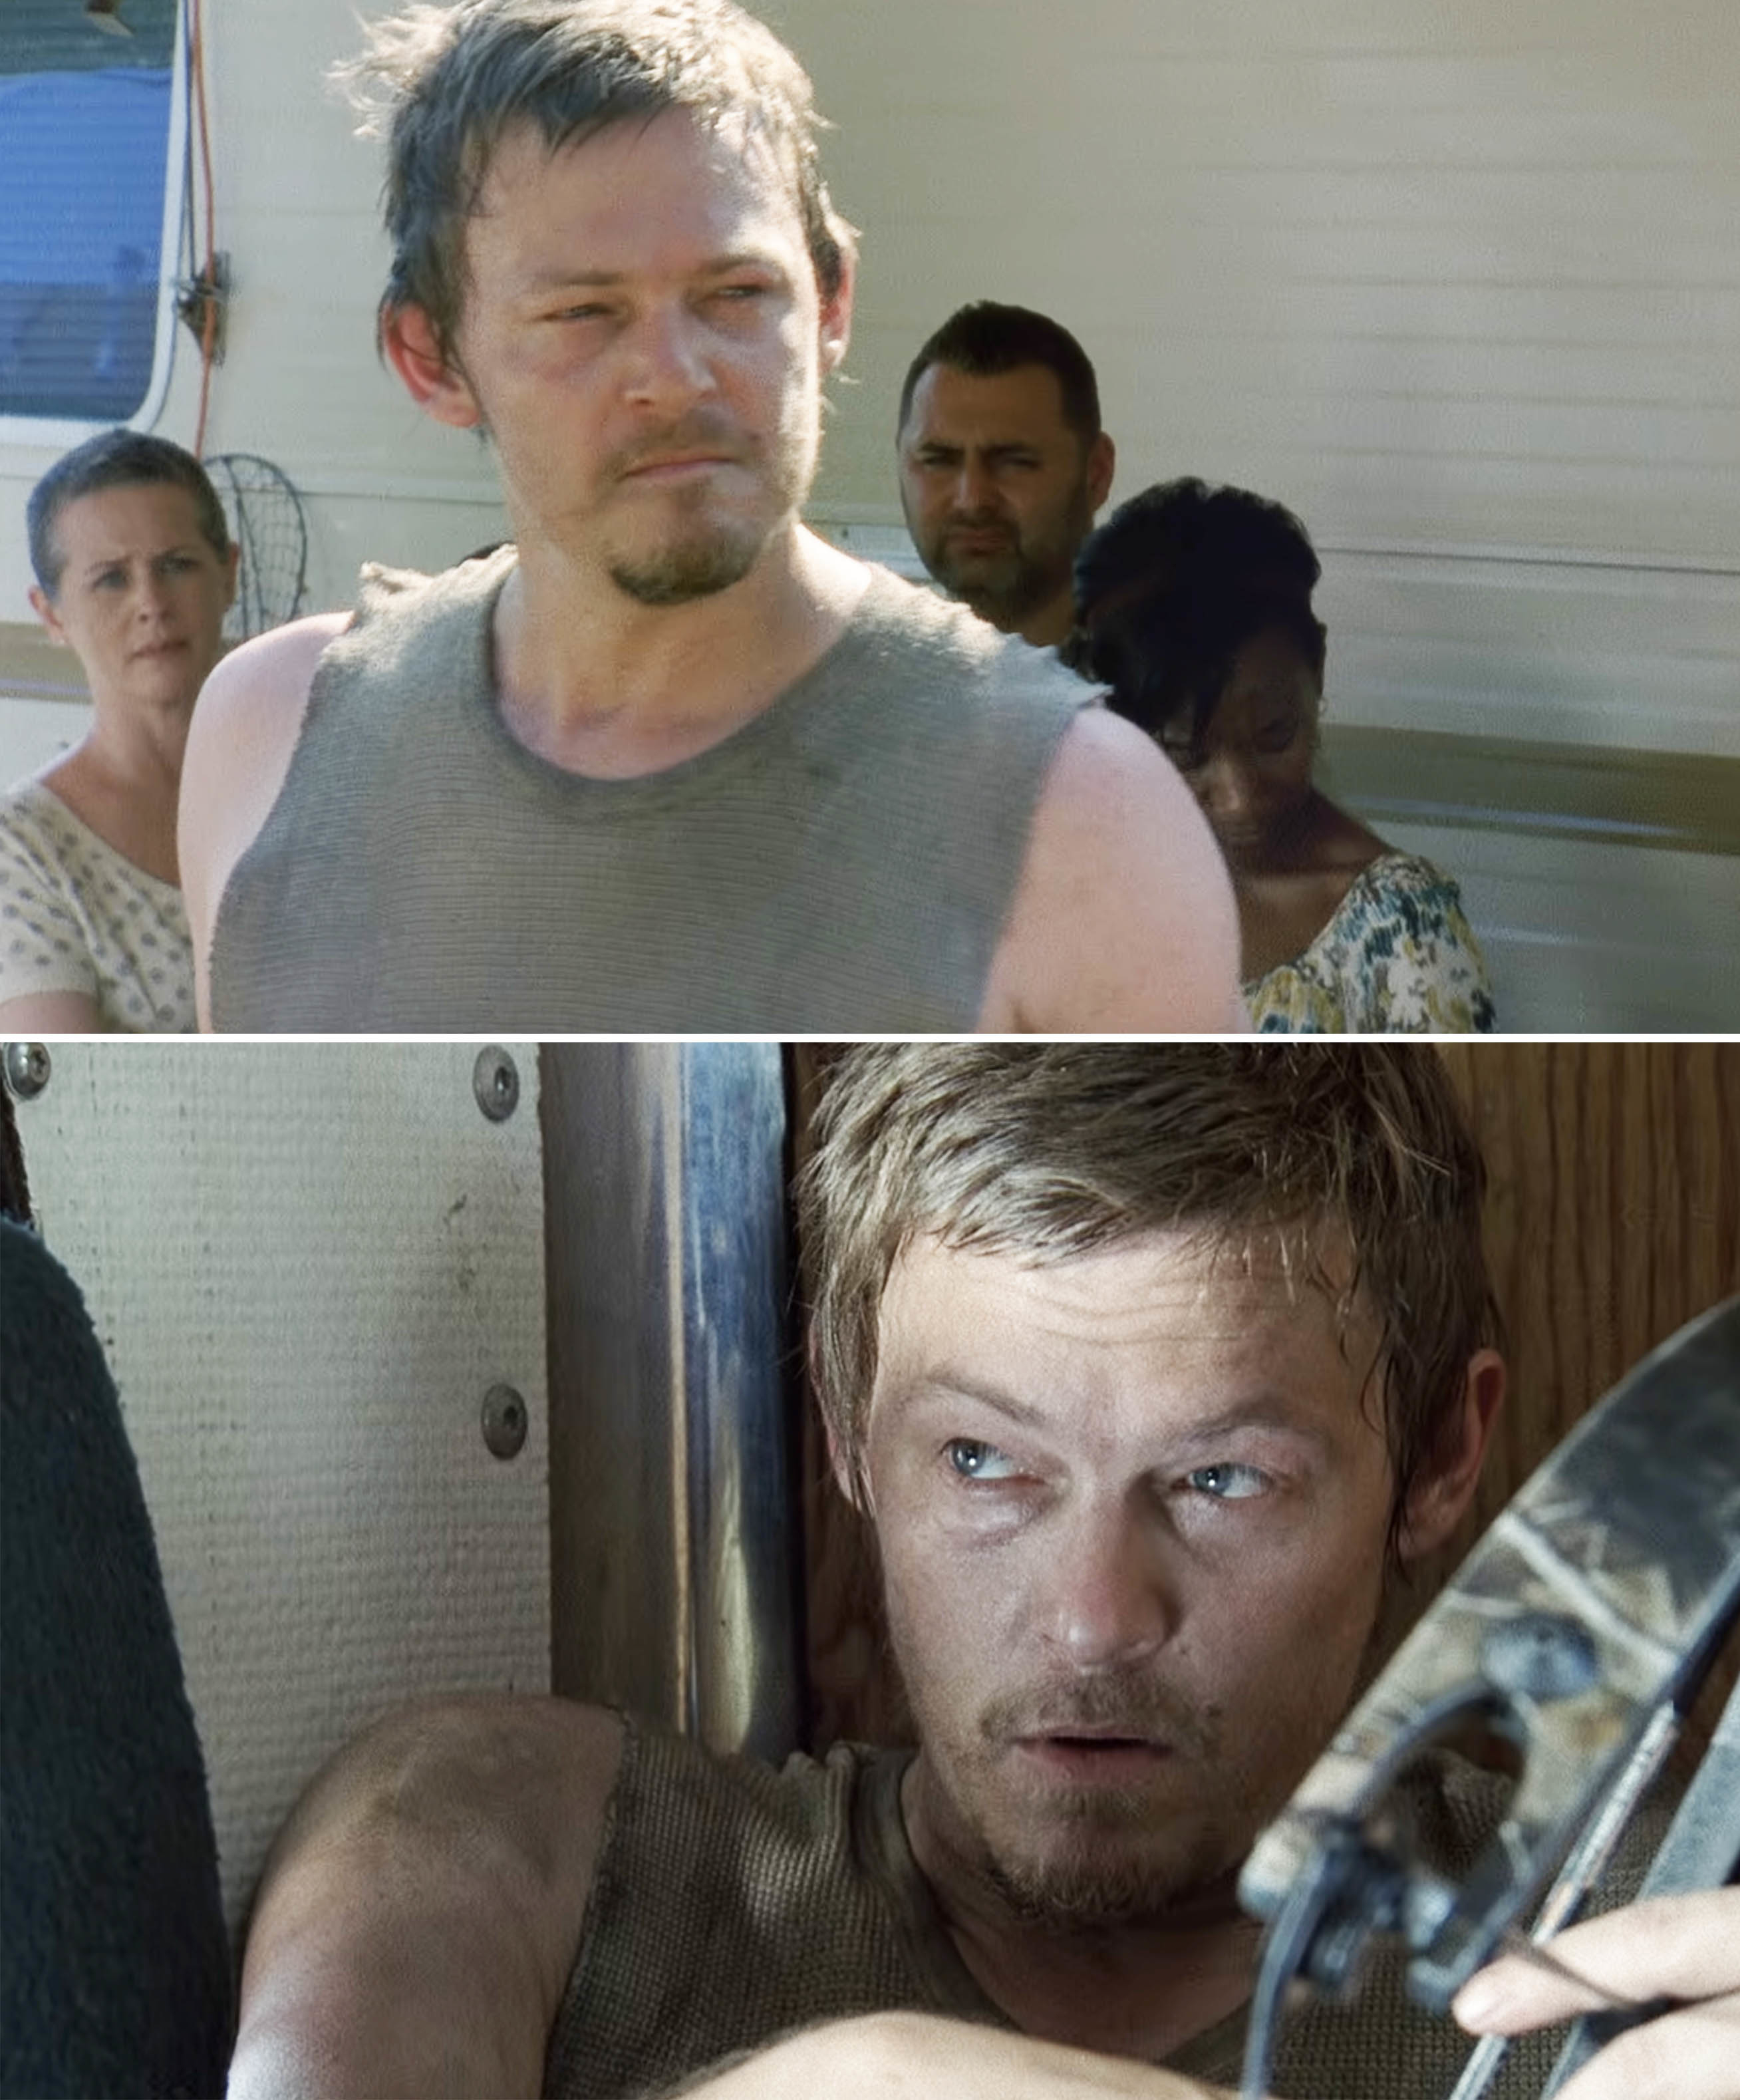 Norman Reedus as Daryl Dixon in &#x27;The Walking Dead&#x27; looking intently, with other characters in the background